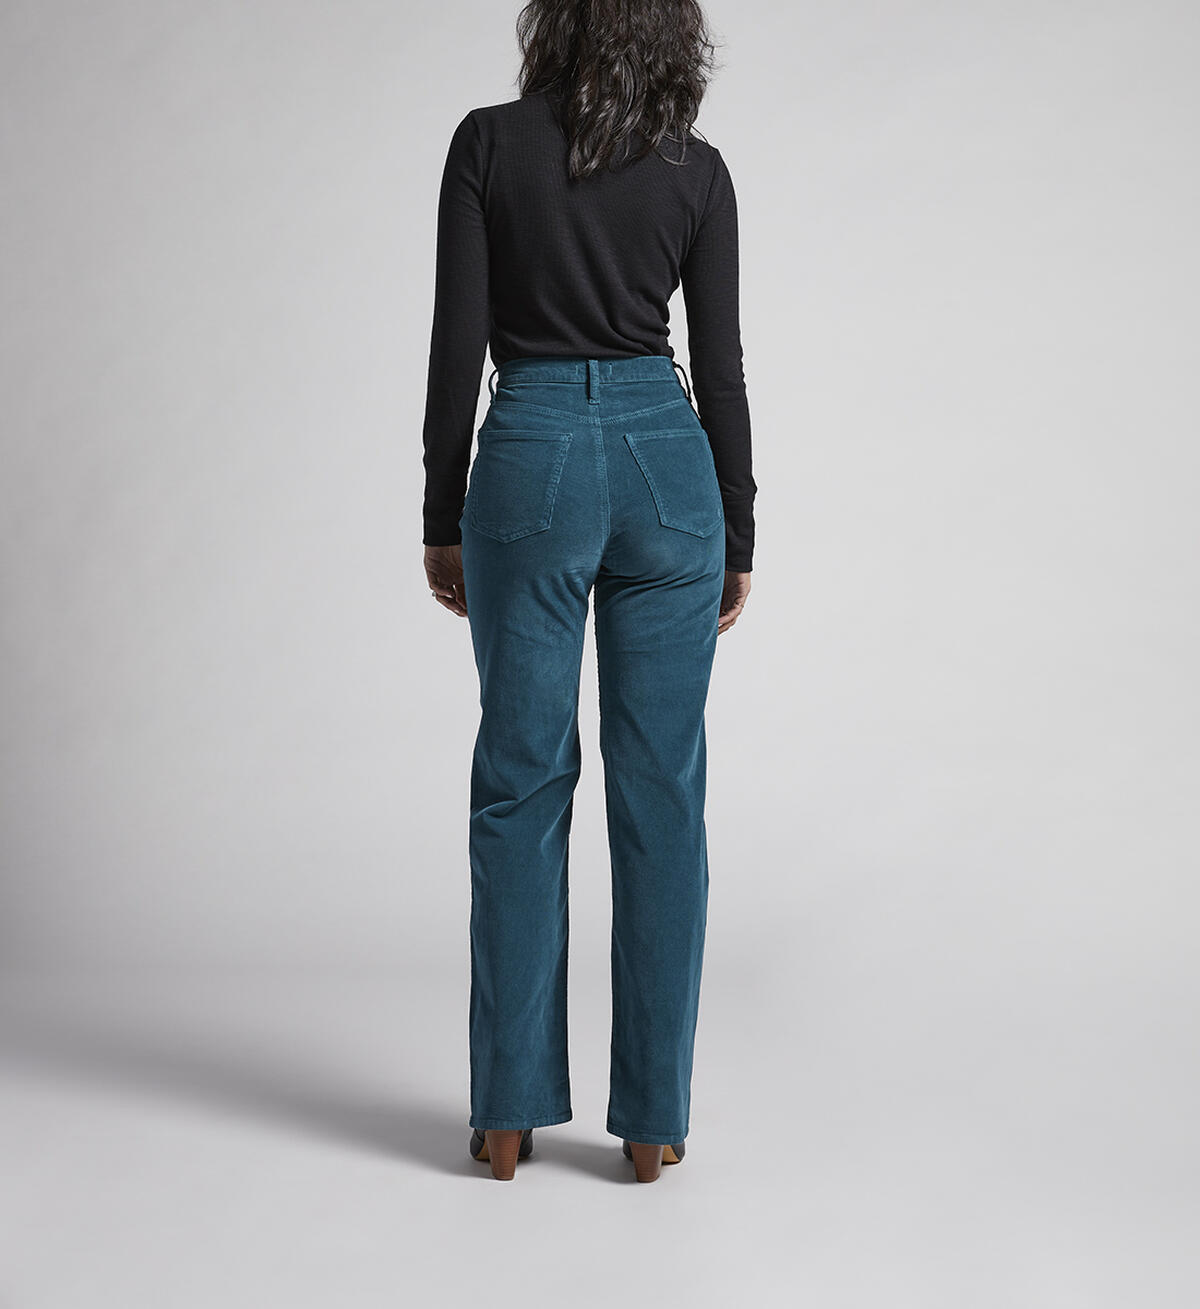 Highly Desirable High Rise Trouser Leg Pants, , hi-res image number 1